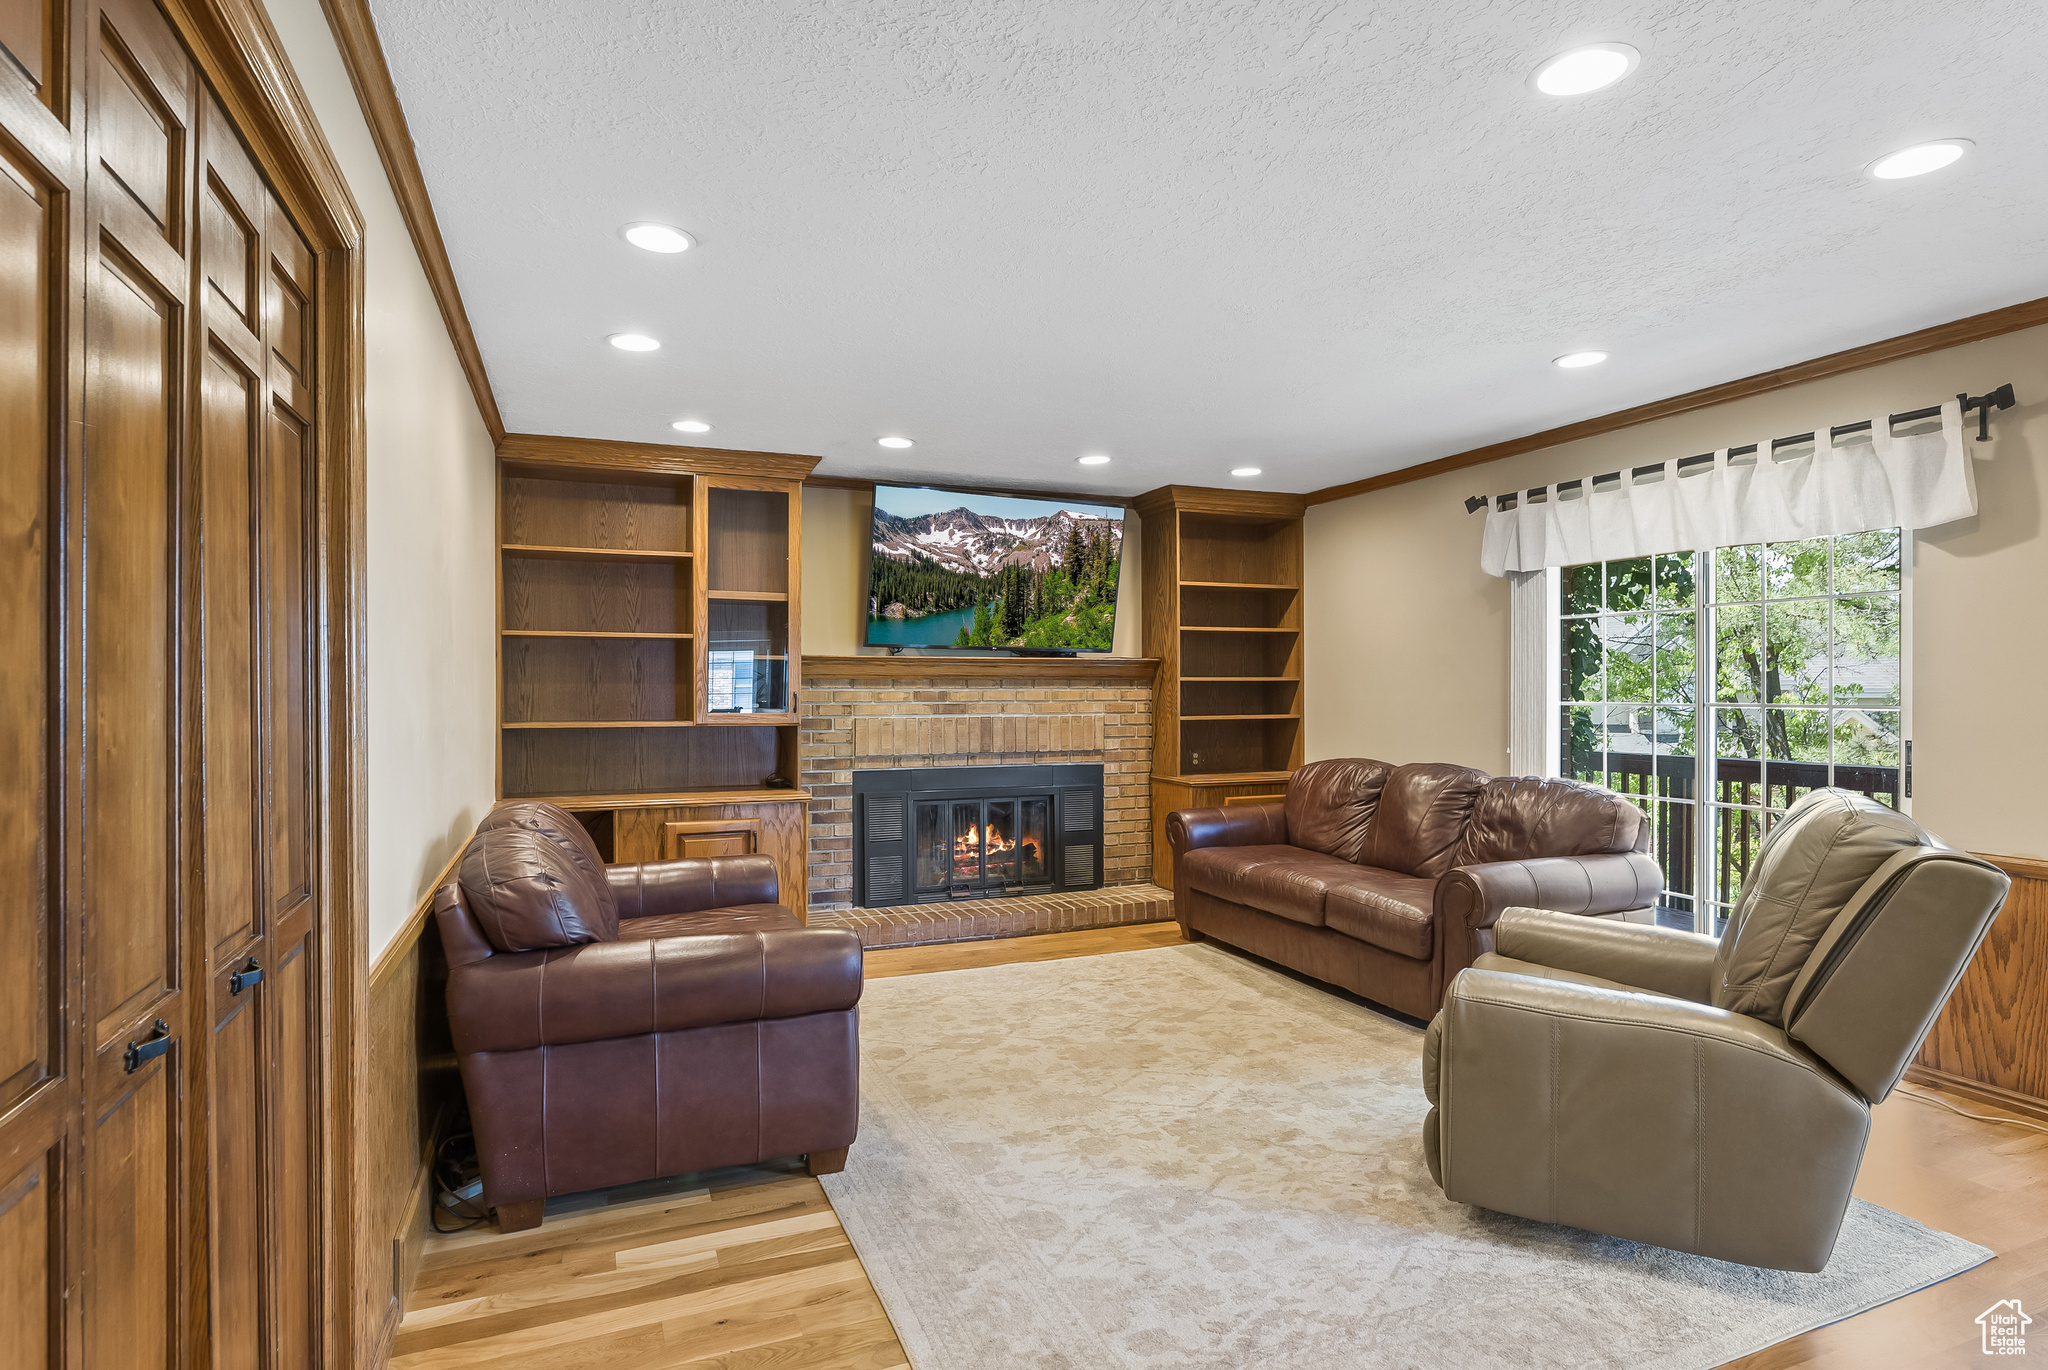 Family room with walkout to deck and warm, inviting fireplace